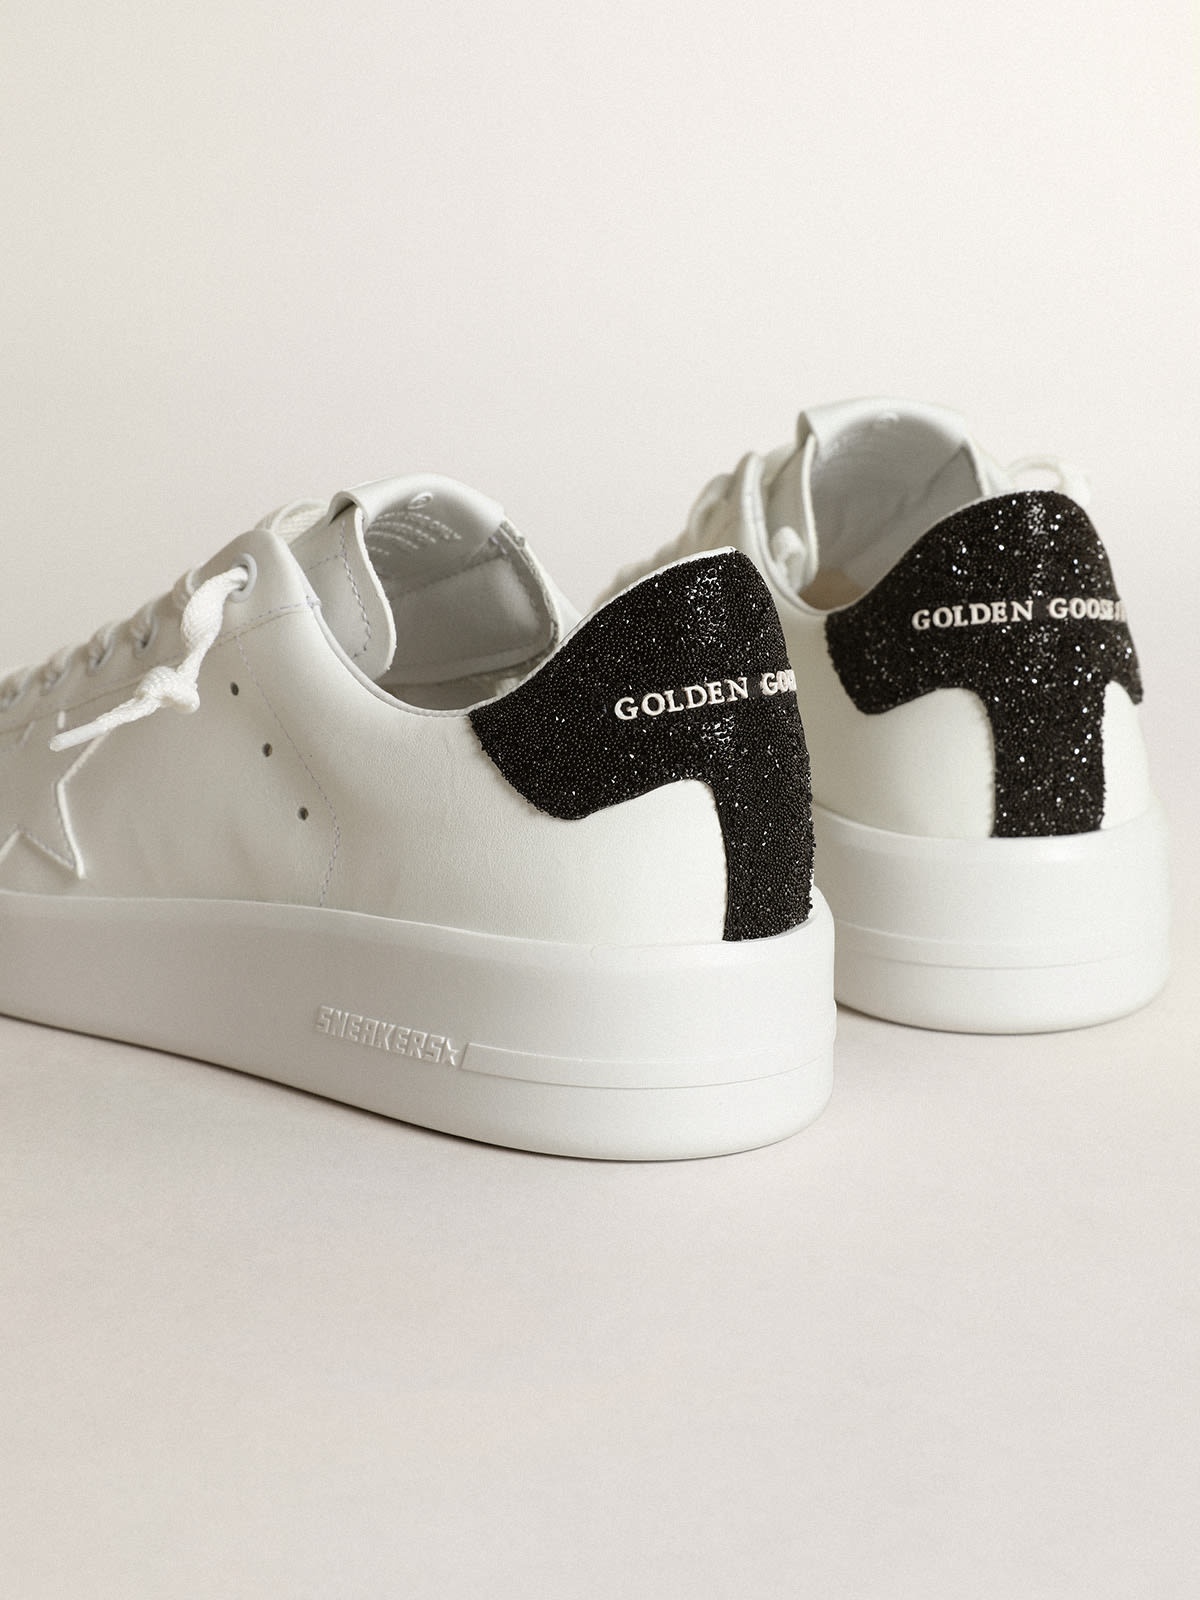 Purestar sneakers in white leather with tone-on-tone star and heel tab in black Swarovski crystals - 4